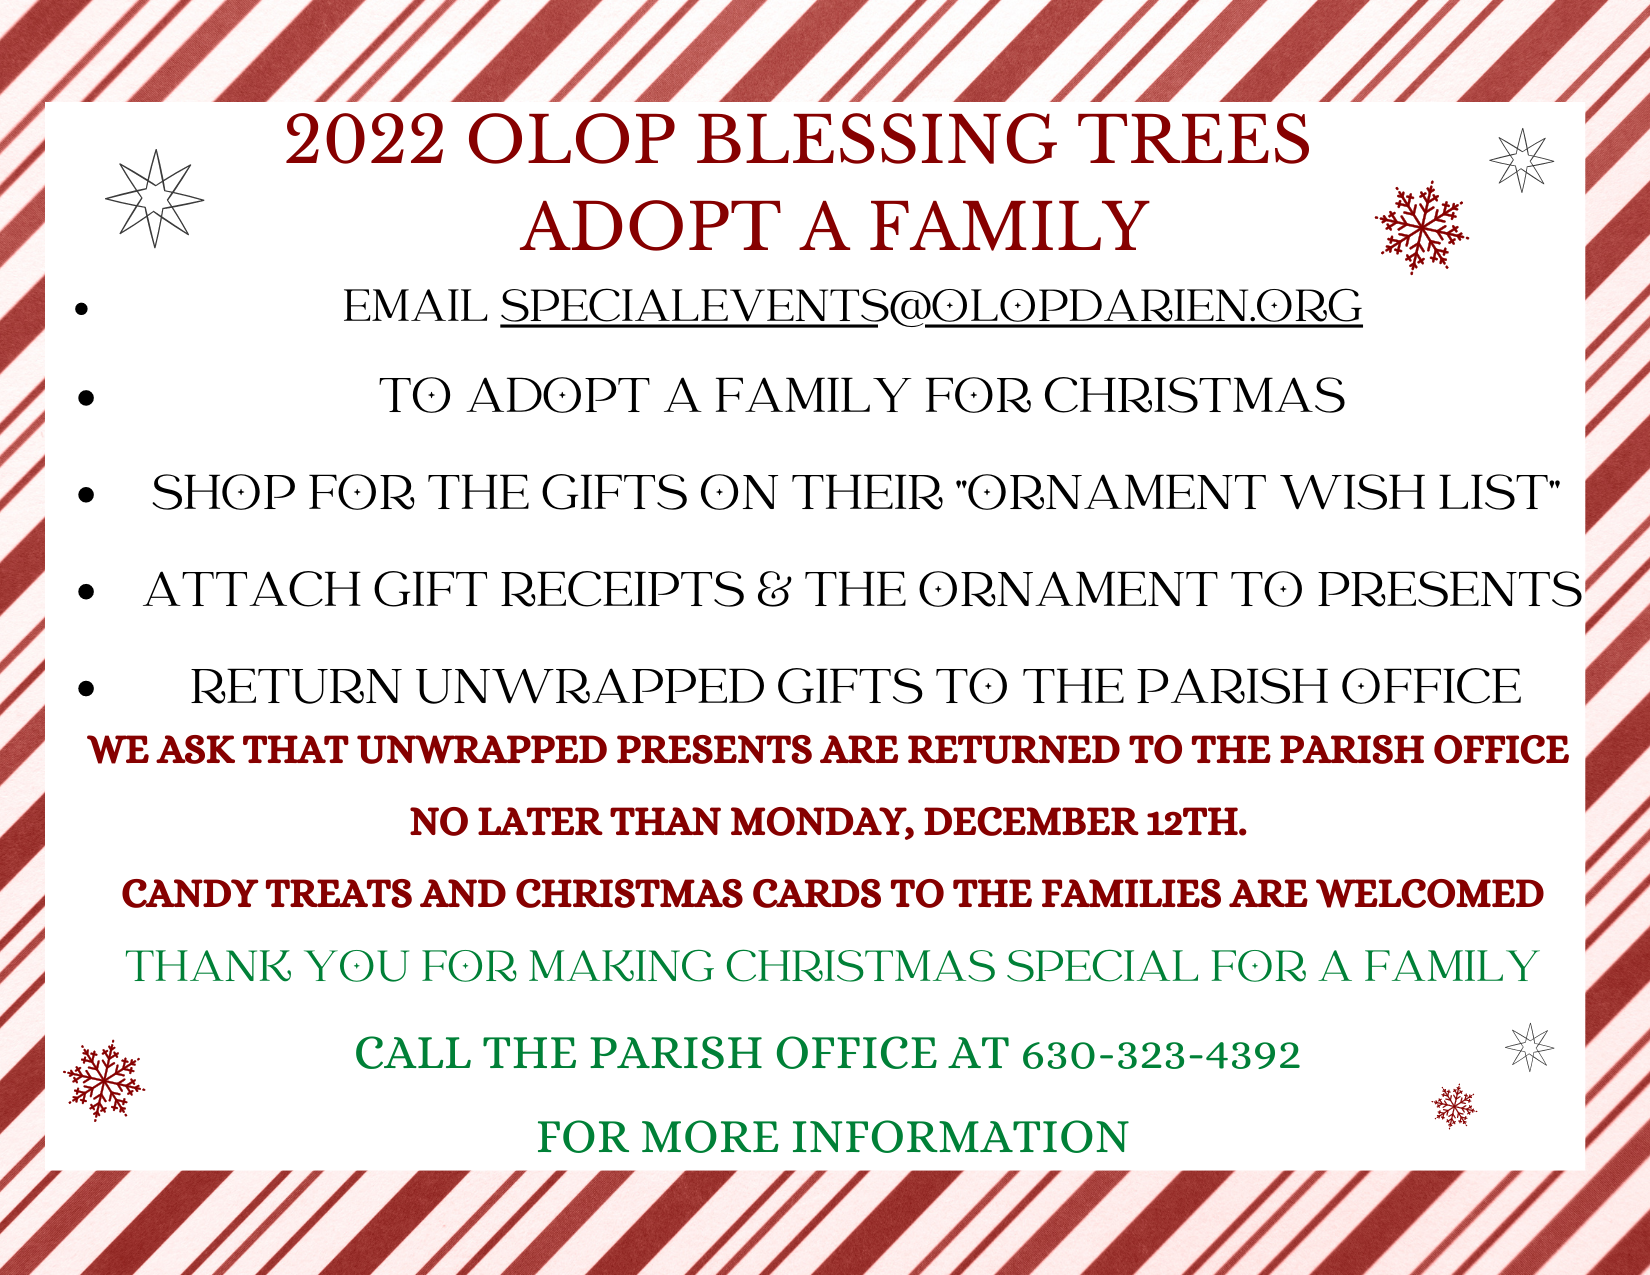 ADOPT-A-FAMILY-WEBSITE-VERSION-BLESSING-TREES-2022